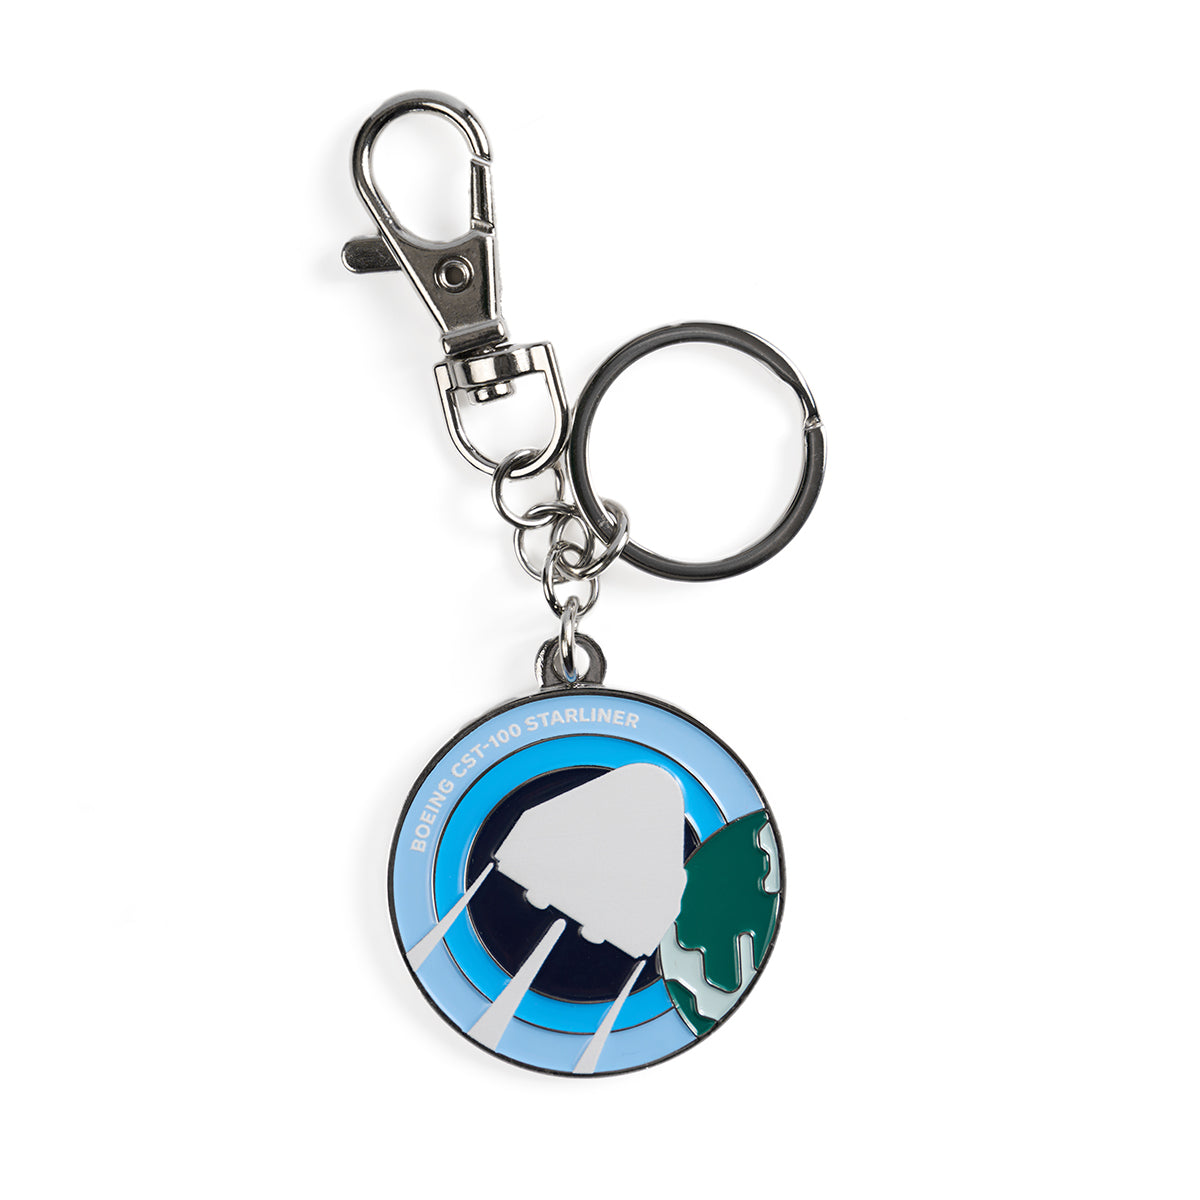 Skyward keychain, featuring the iconic Boeing CST-100 Starliner in a roundel design.